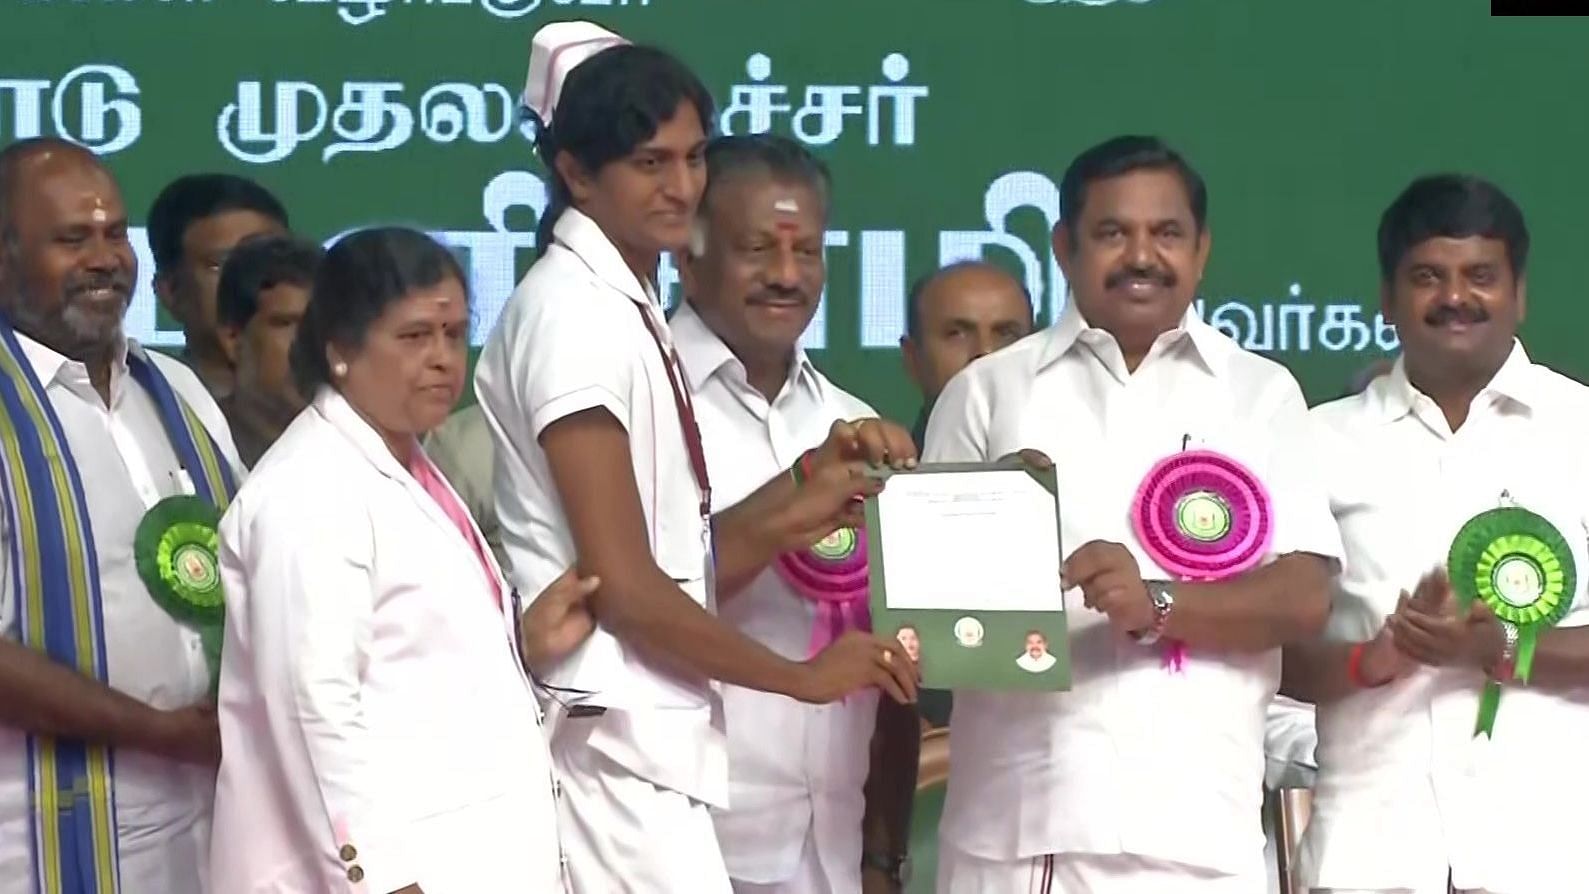 Anbu Ruby received the appointment order from Chief Minister Edappadi K Palaniswami and Health Minister C Vijayabaskar.